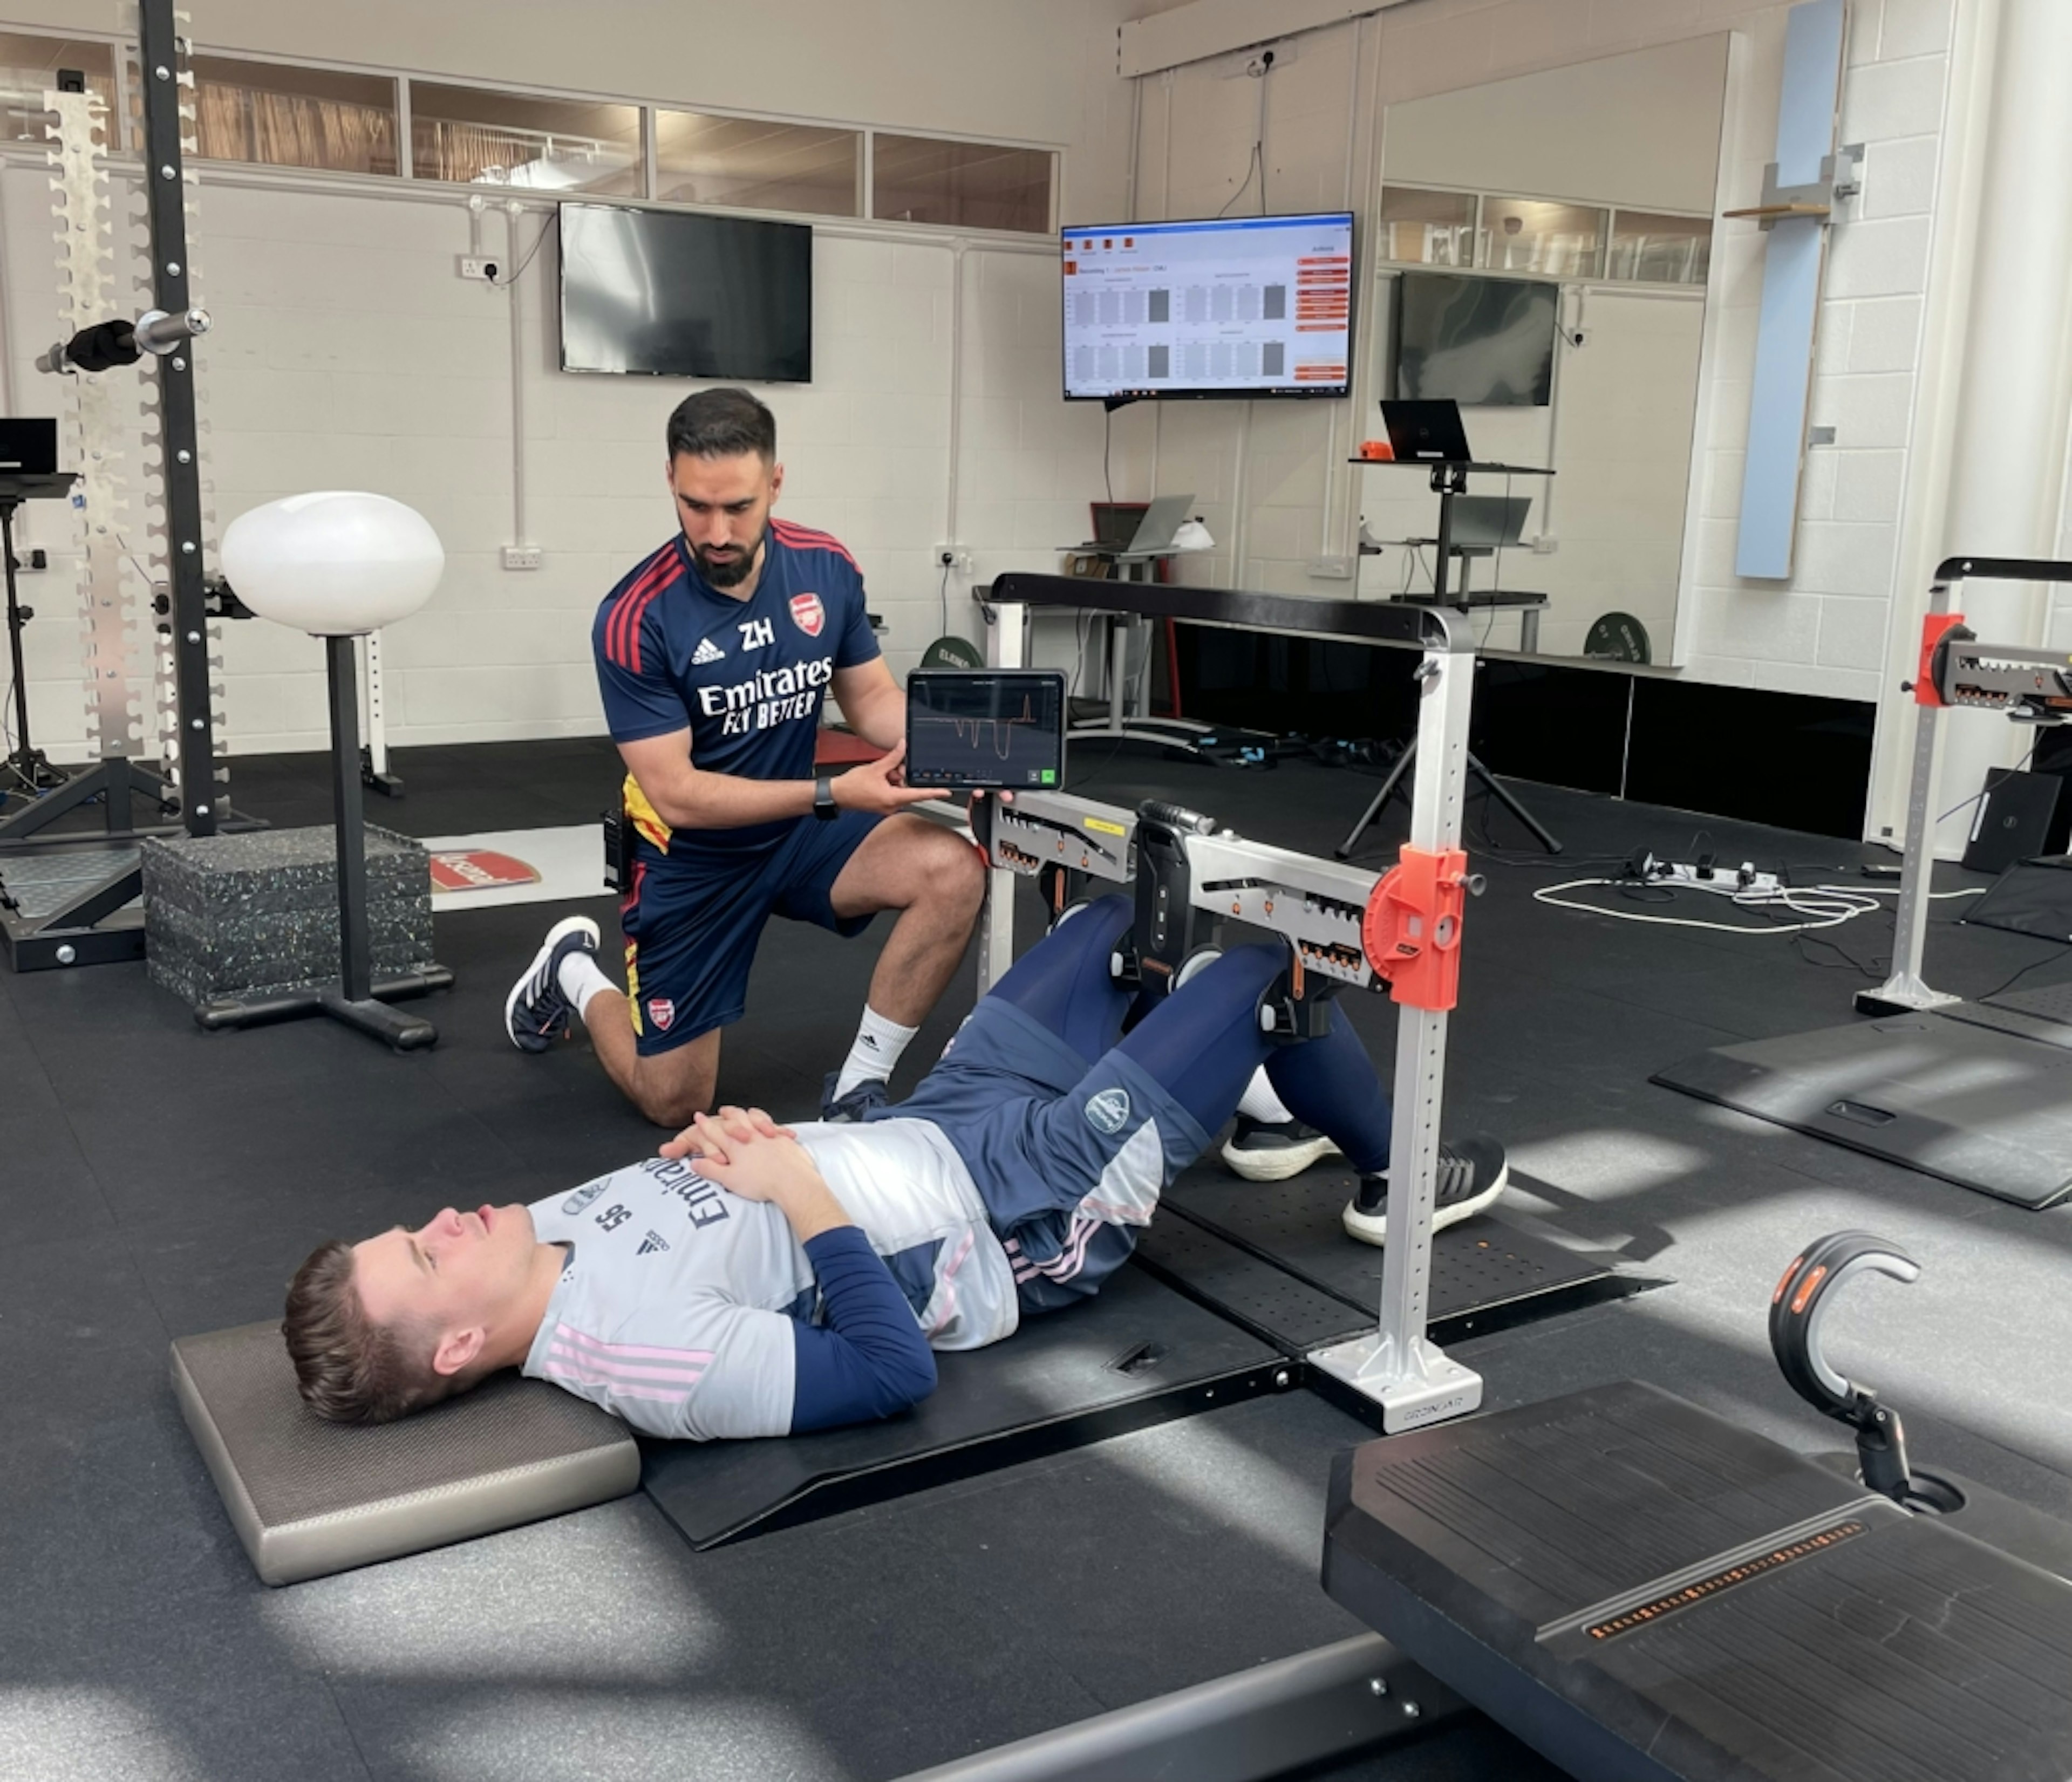 Physiotherapist Zubair Haleem performing hip abduction/adduction using ForceFrame at Arsenal F.C.